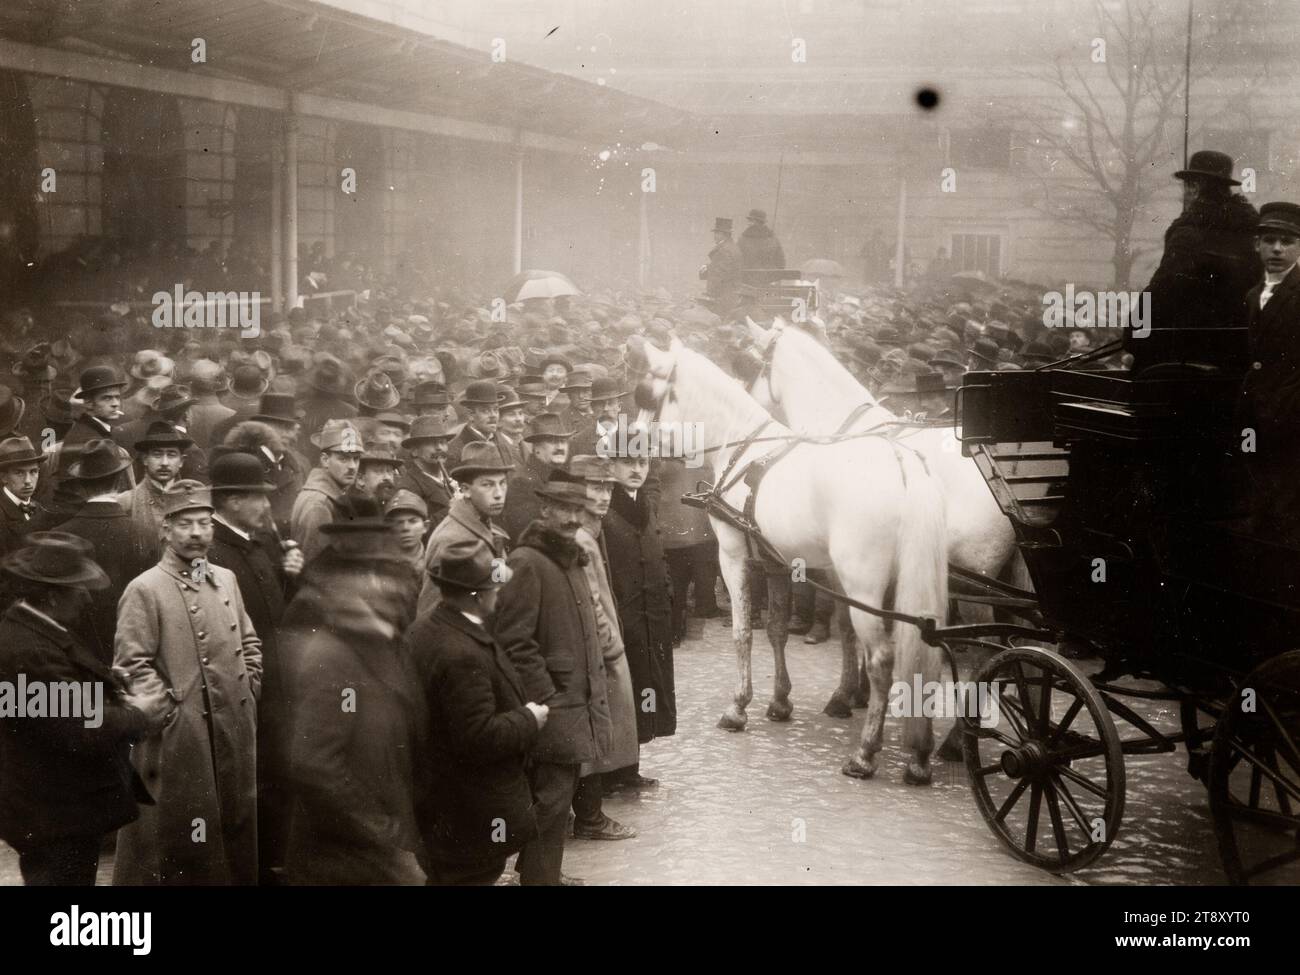 Auction of horses from the Lipizza stud of the former Austrian court, Richard Hauffe (1878-1933), Photographer, Date around 1920, photography, horse, auction sale, public sale, The Vienna Collection Stock Photo